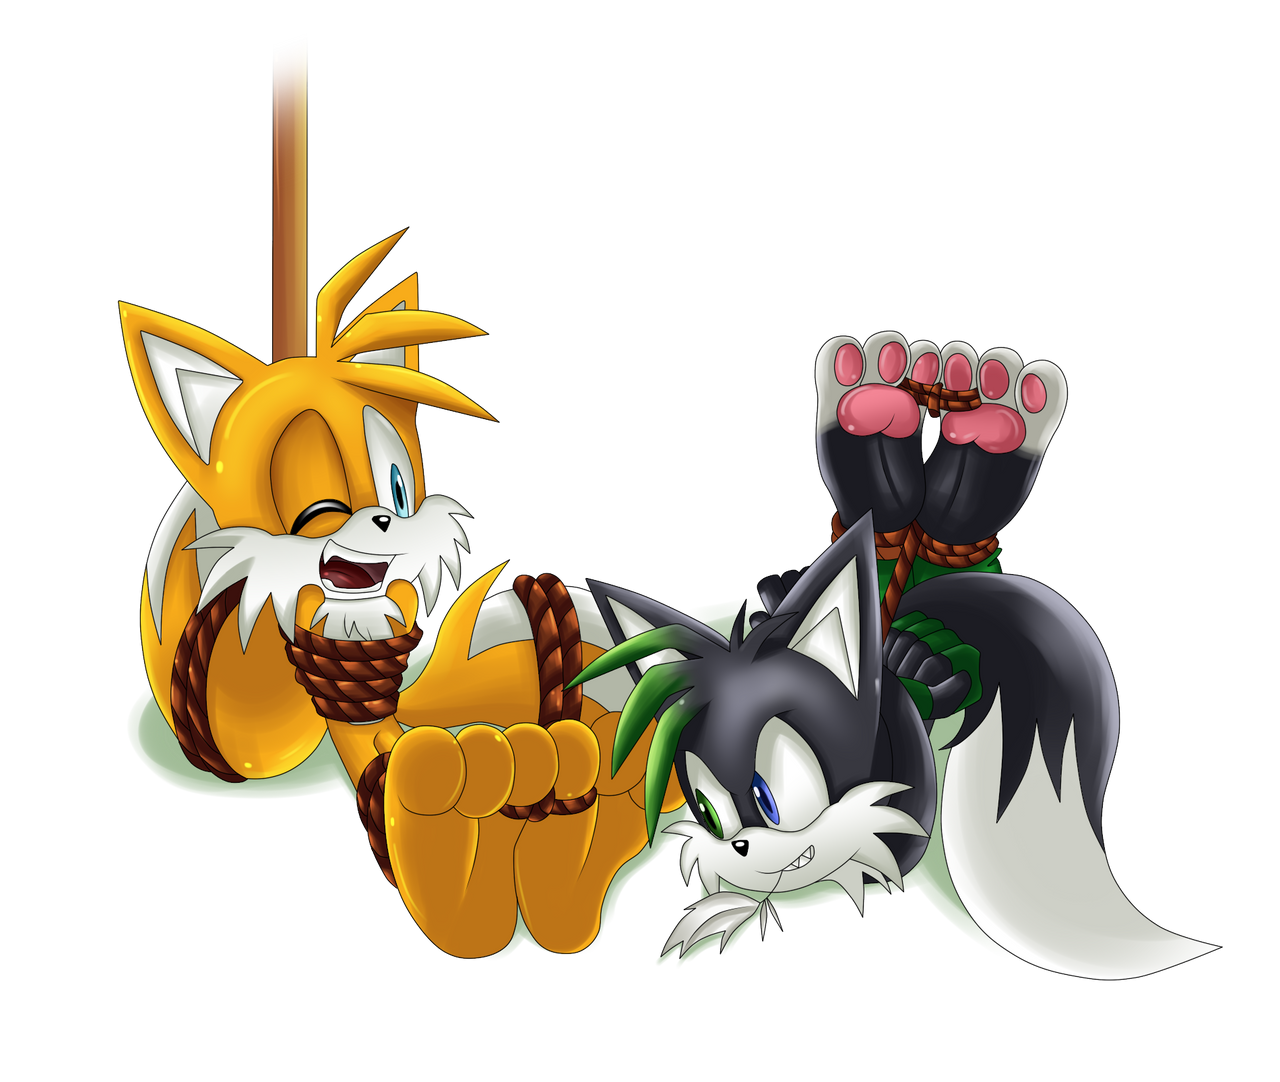 Shadz 'n' Tails: Tie-ups and tickles by Shadz-the-Fox on DeviantArt